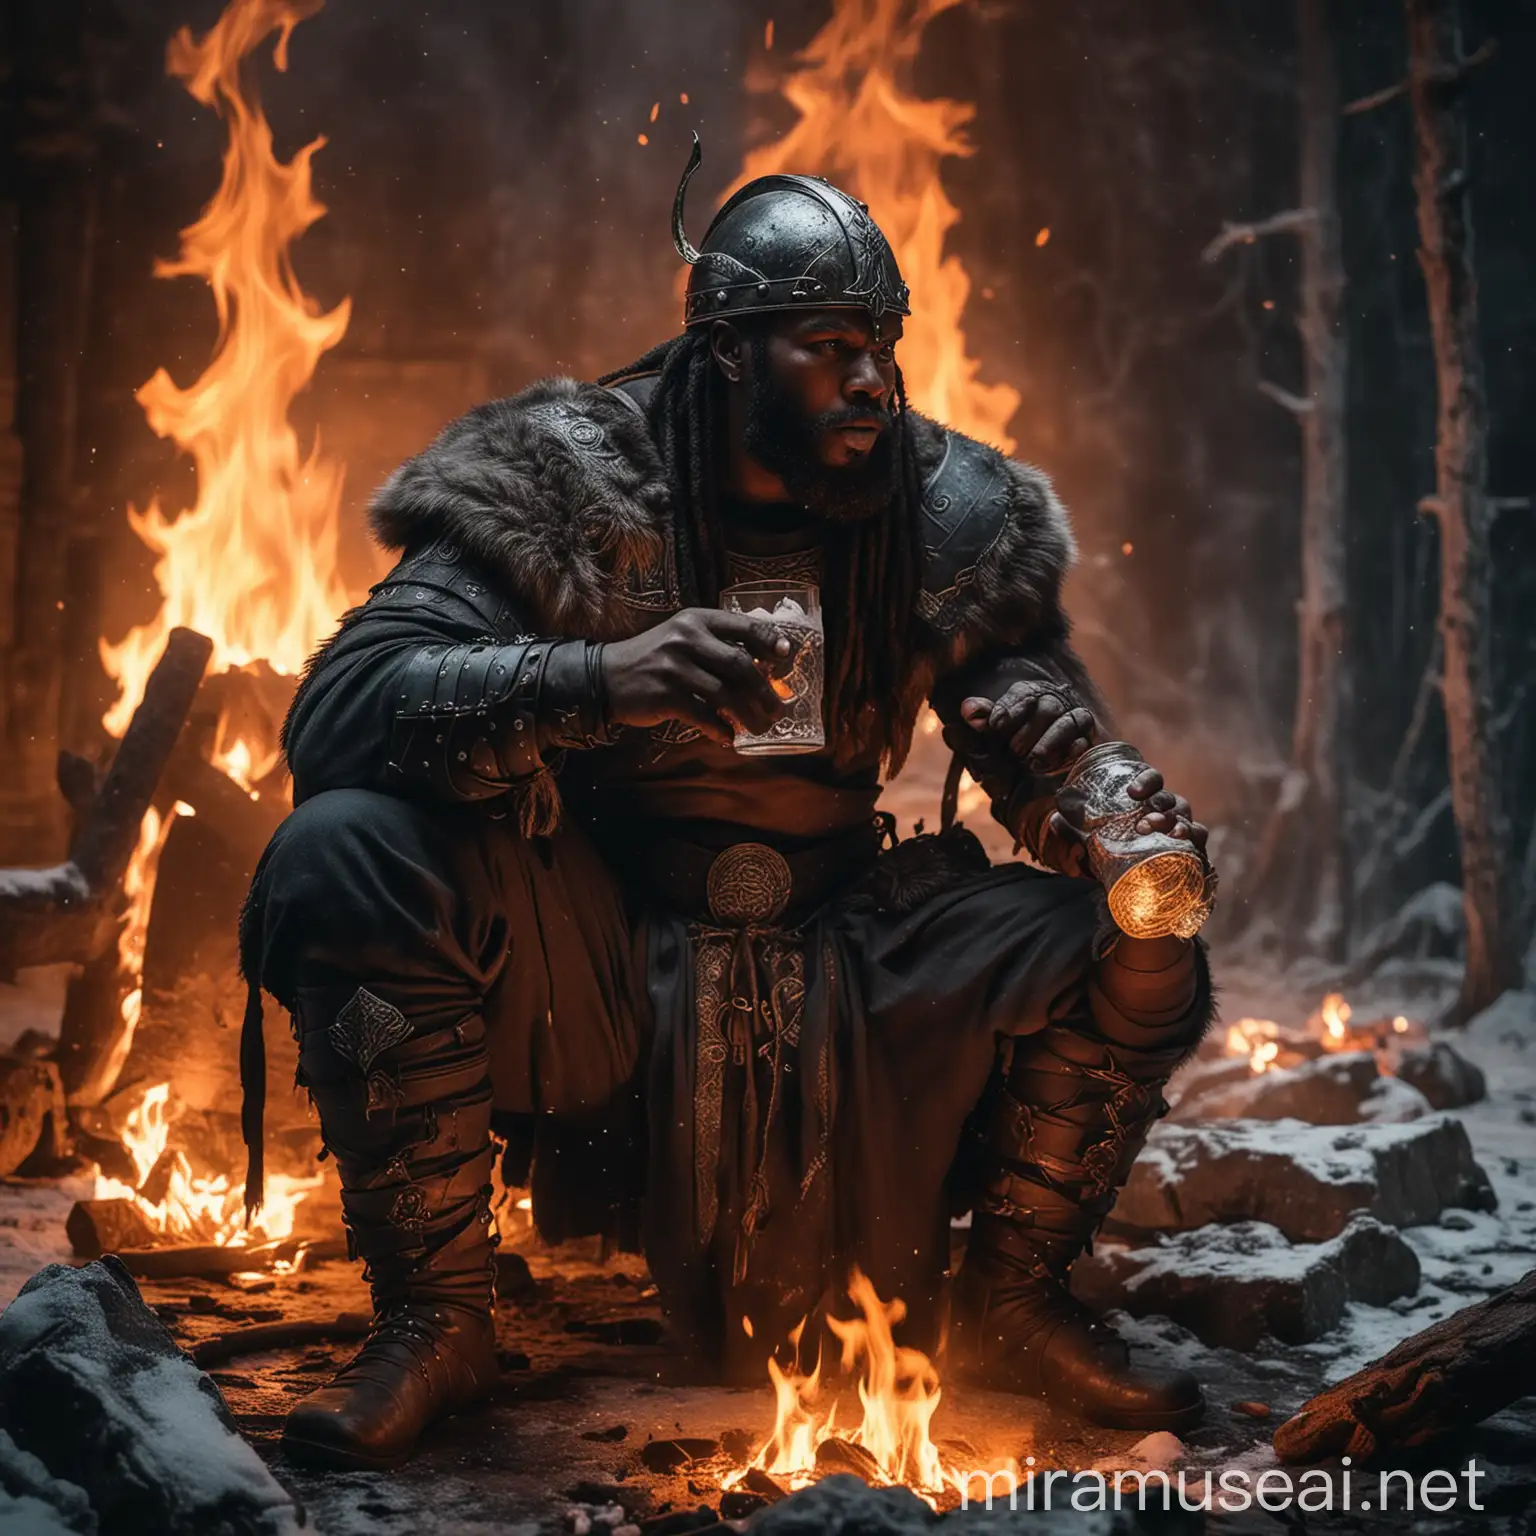 Black Viking Warrior Refreshing with Ice Cold Water amidst Blazing Fire